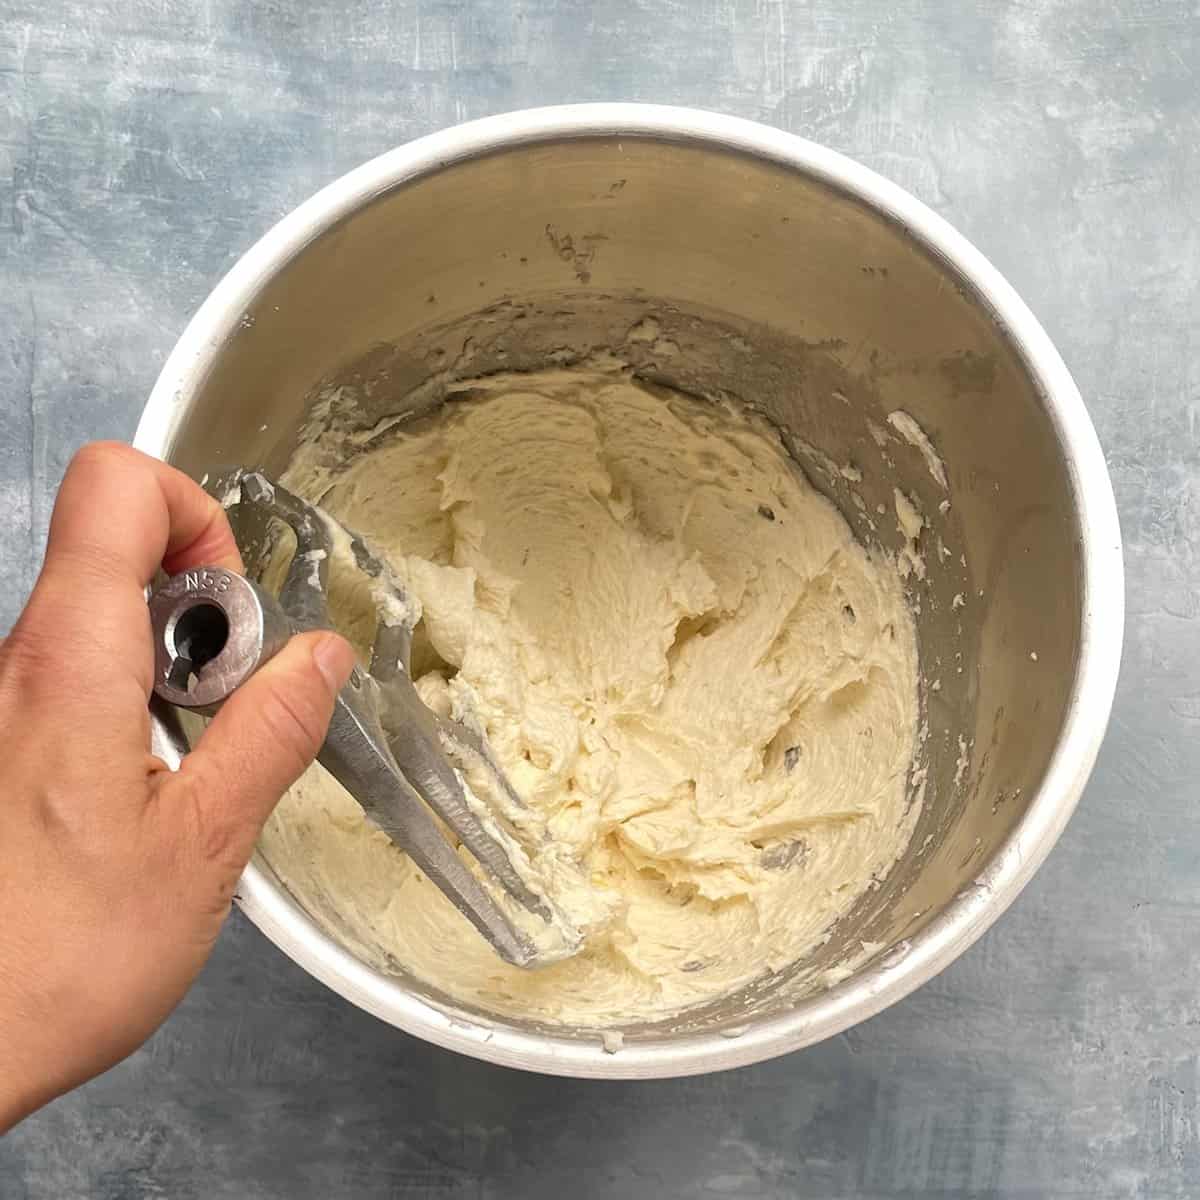 maple donut cake batter after mixing butter, sugar, eggs, and vanilla.